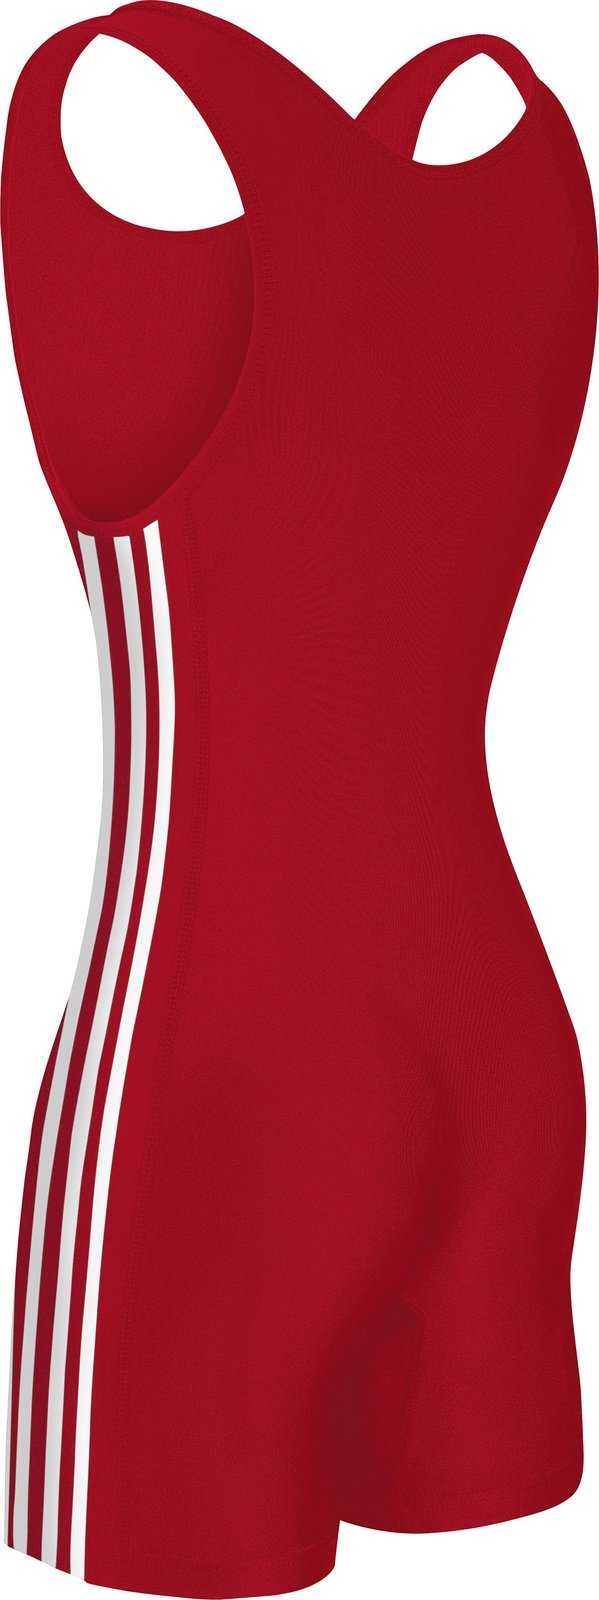 Adidas aS102s 3 Stripe Wrestling Singlet - Red White - HIT a Double